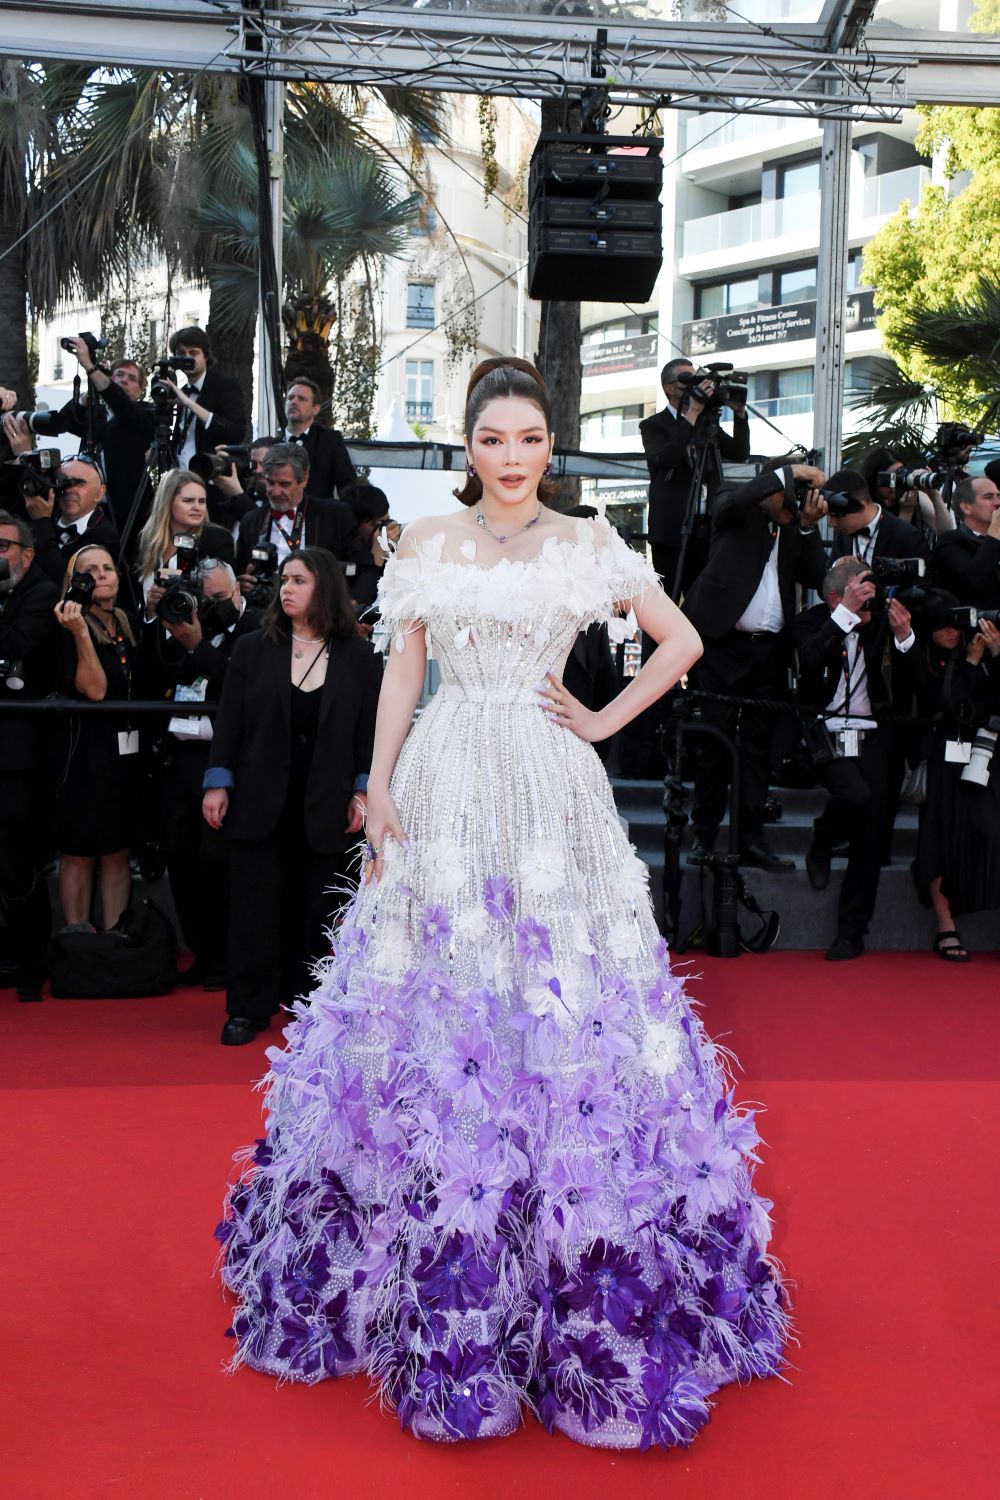 Ly Nha Ky shows off her splendor in a lavender dress on the Cannes red carpet - Photo 2.